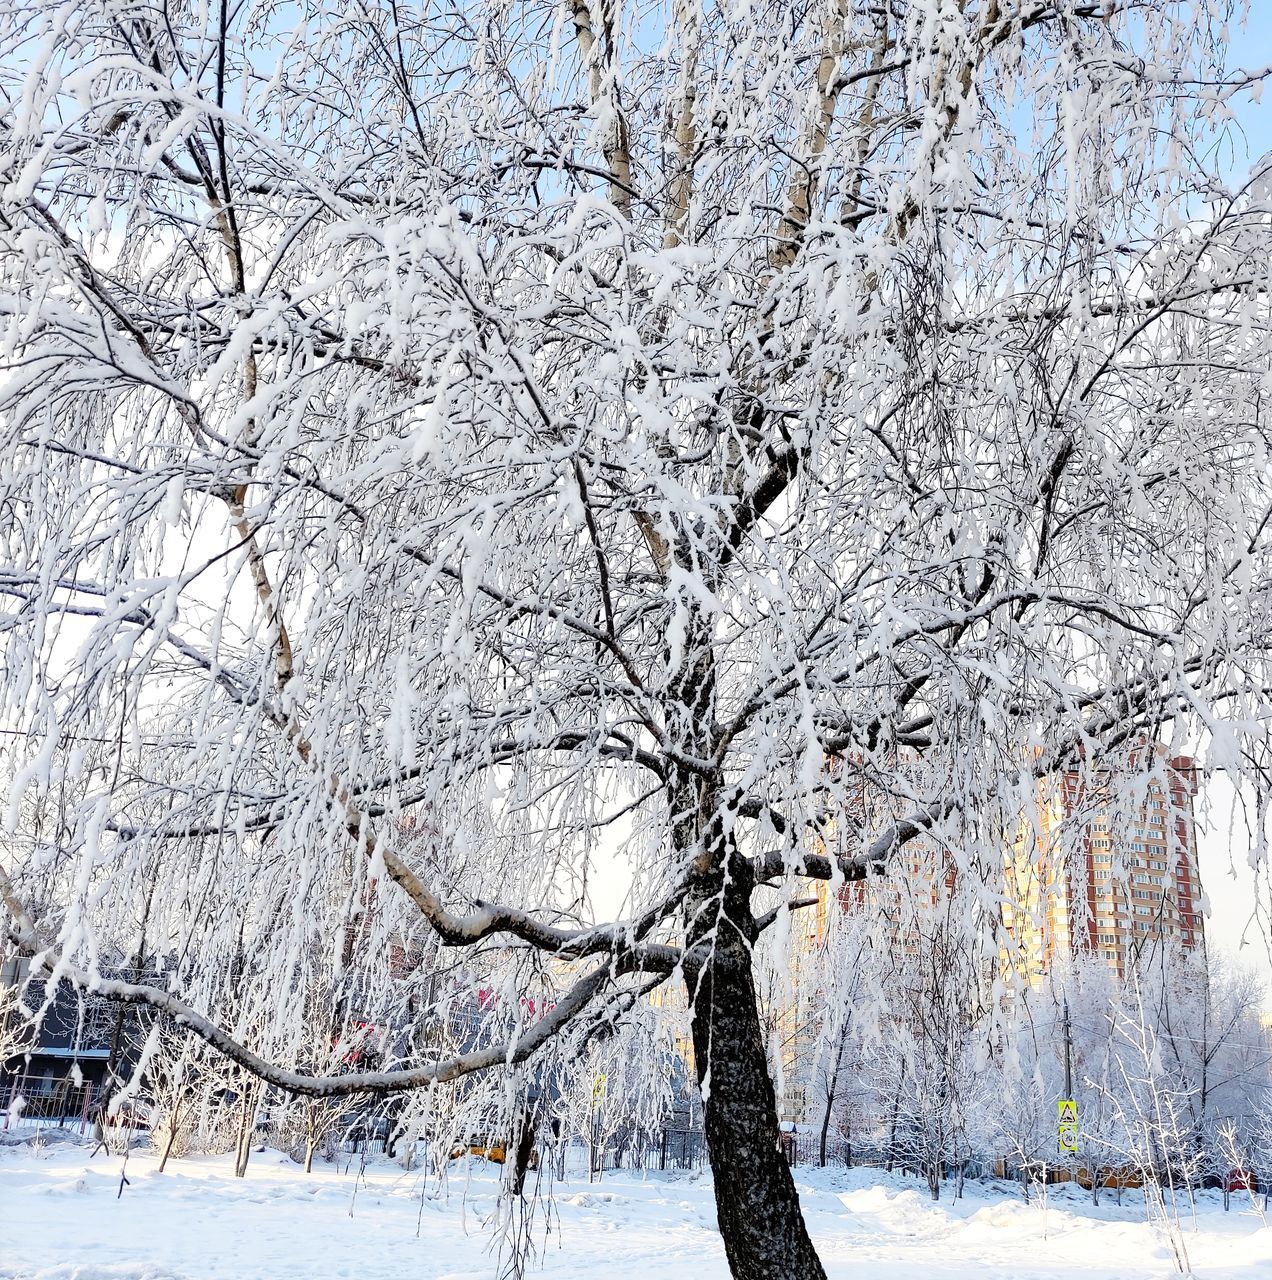 tree, cold temperature, snow, plant, winter, beauty in nature, nature, white, branch, environment, tranquility, scenics - nature, freezing, landscape, bare tree, tranquil scene, frozen, frost, no people, land, day, outdoors, tree trunk, trunk, sky, non-urban scene, growth, freshness, idyllic, springtime, deep snow, covering, spring, flower